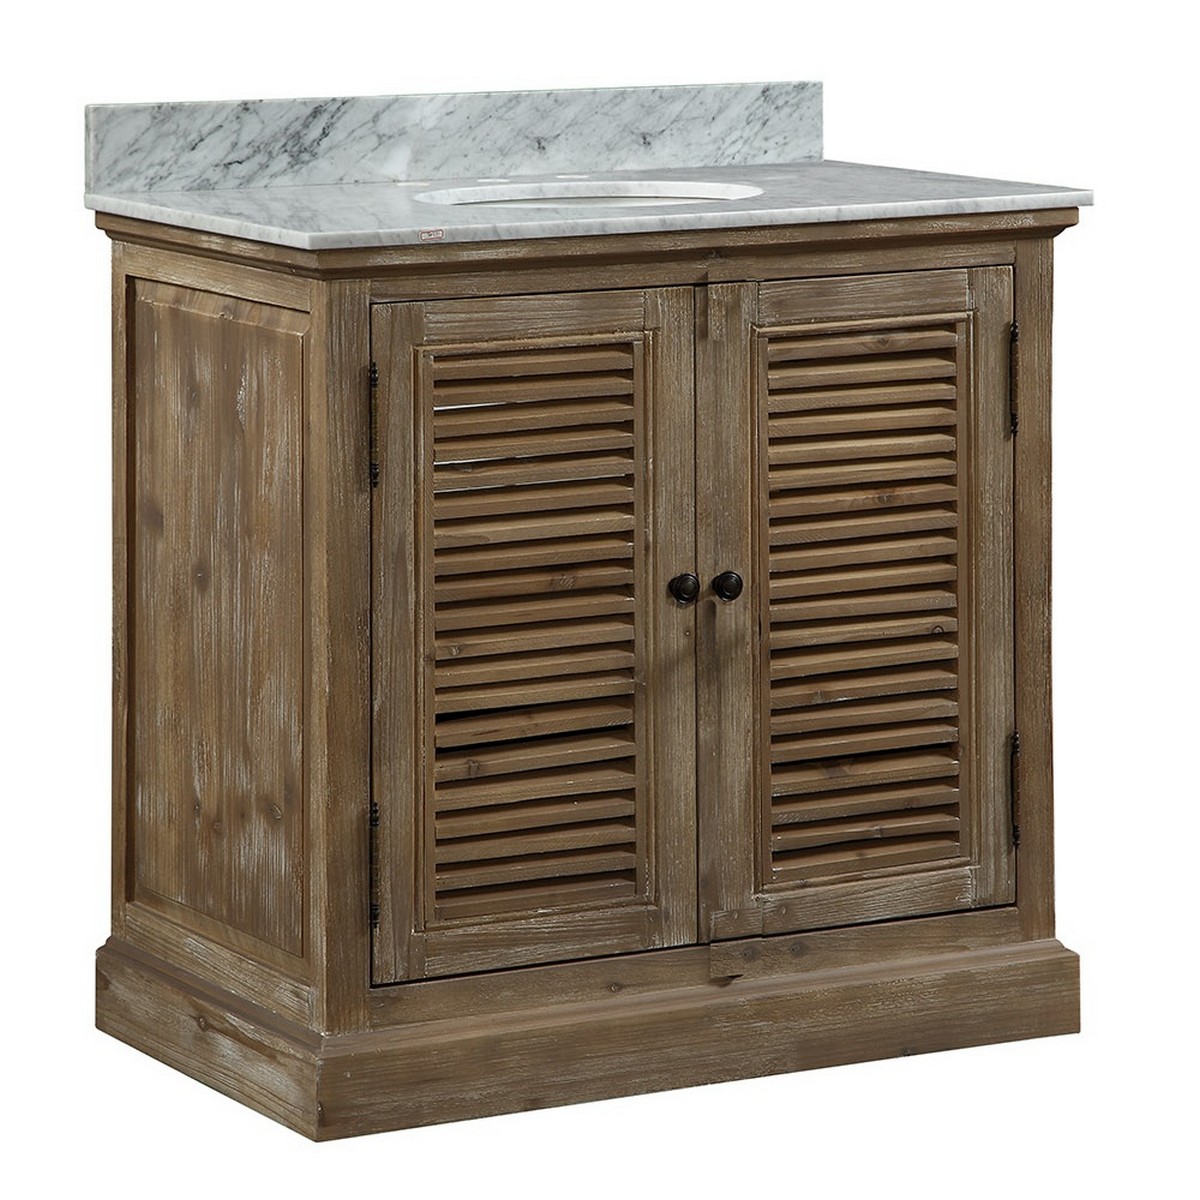 INFURNITURE WK1936+CW TOP 36 INCH SOLID WOOD SINGLE SINK VANITY WITH CARRARA WHITE MARBLE TOP